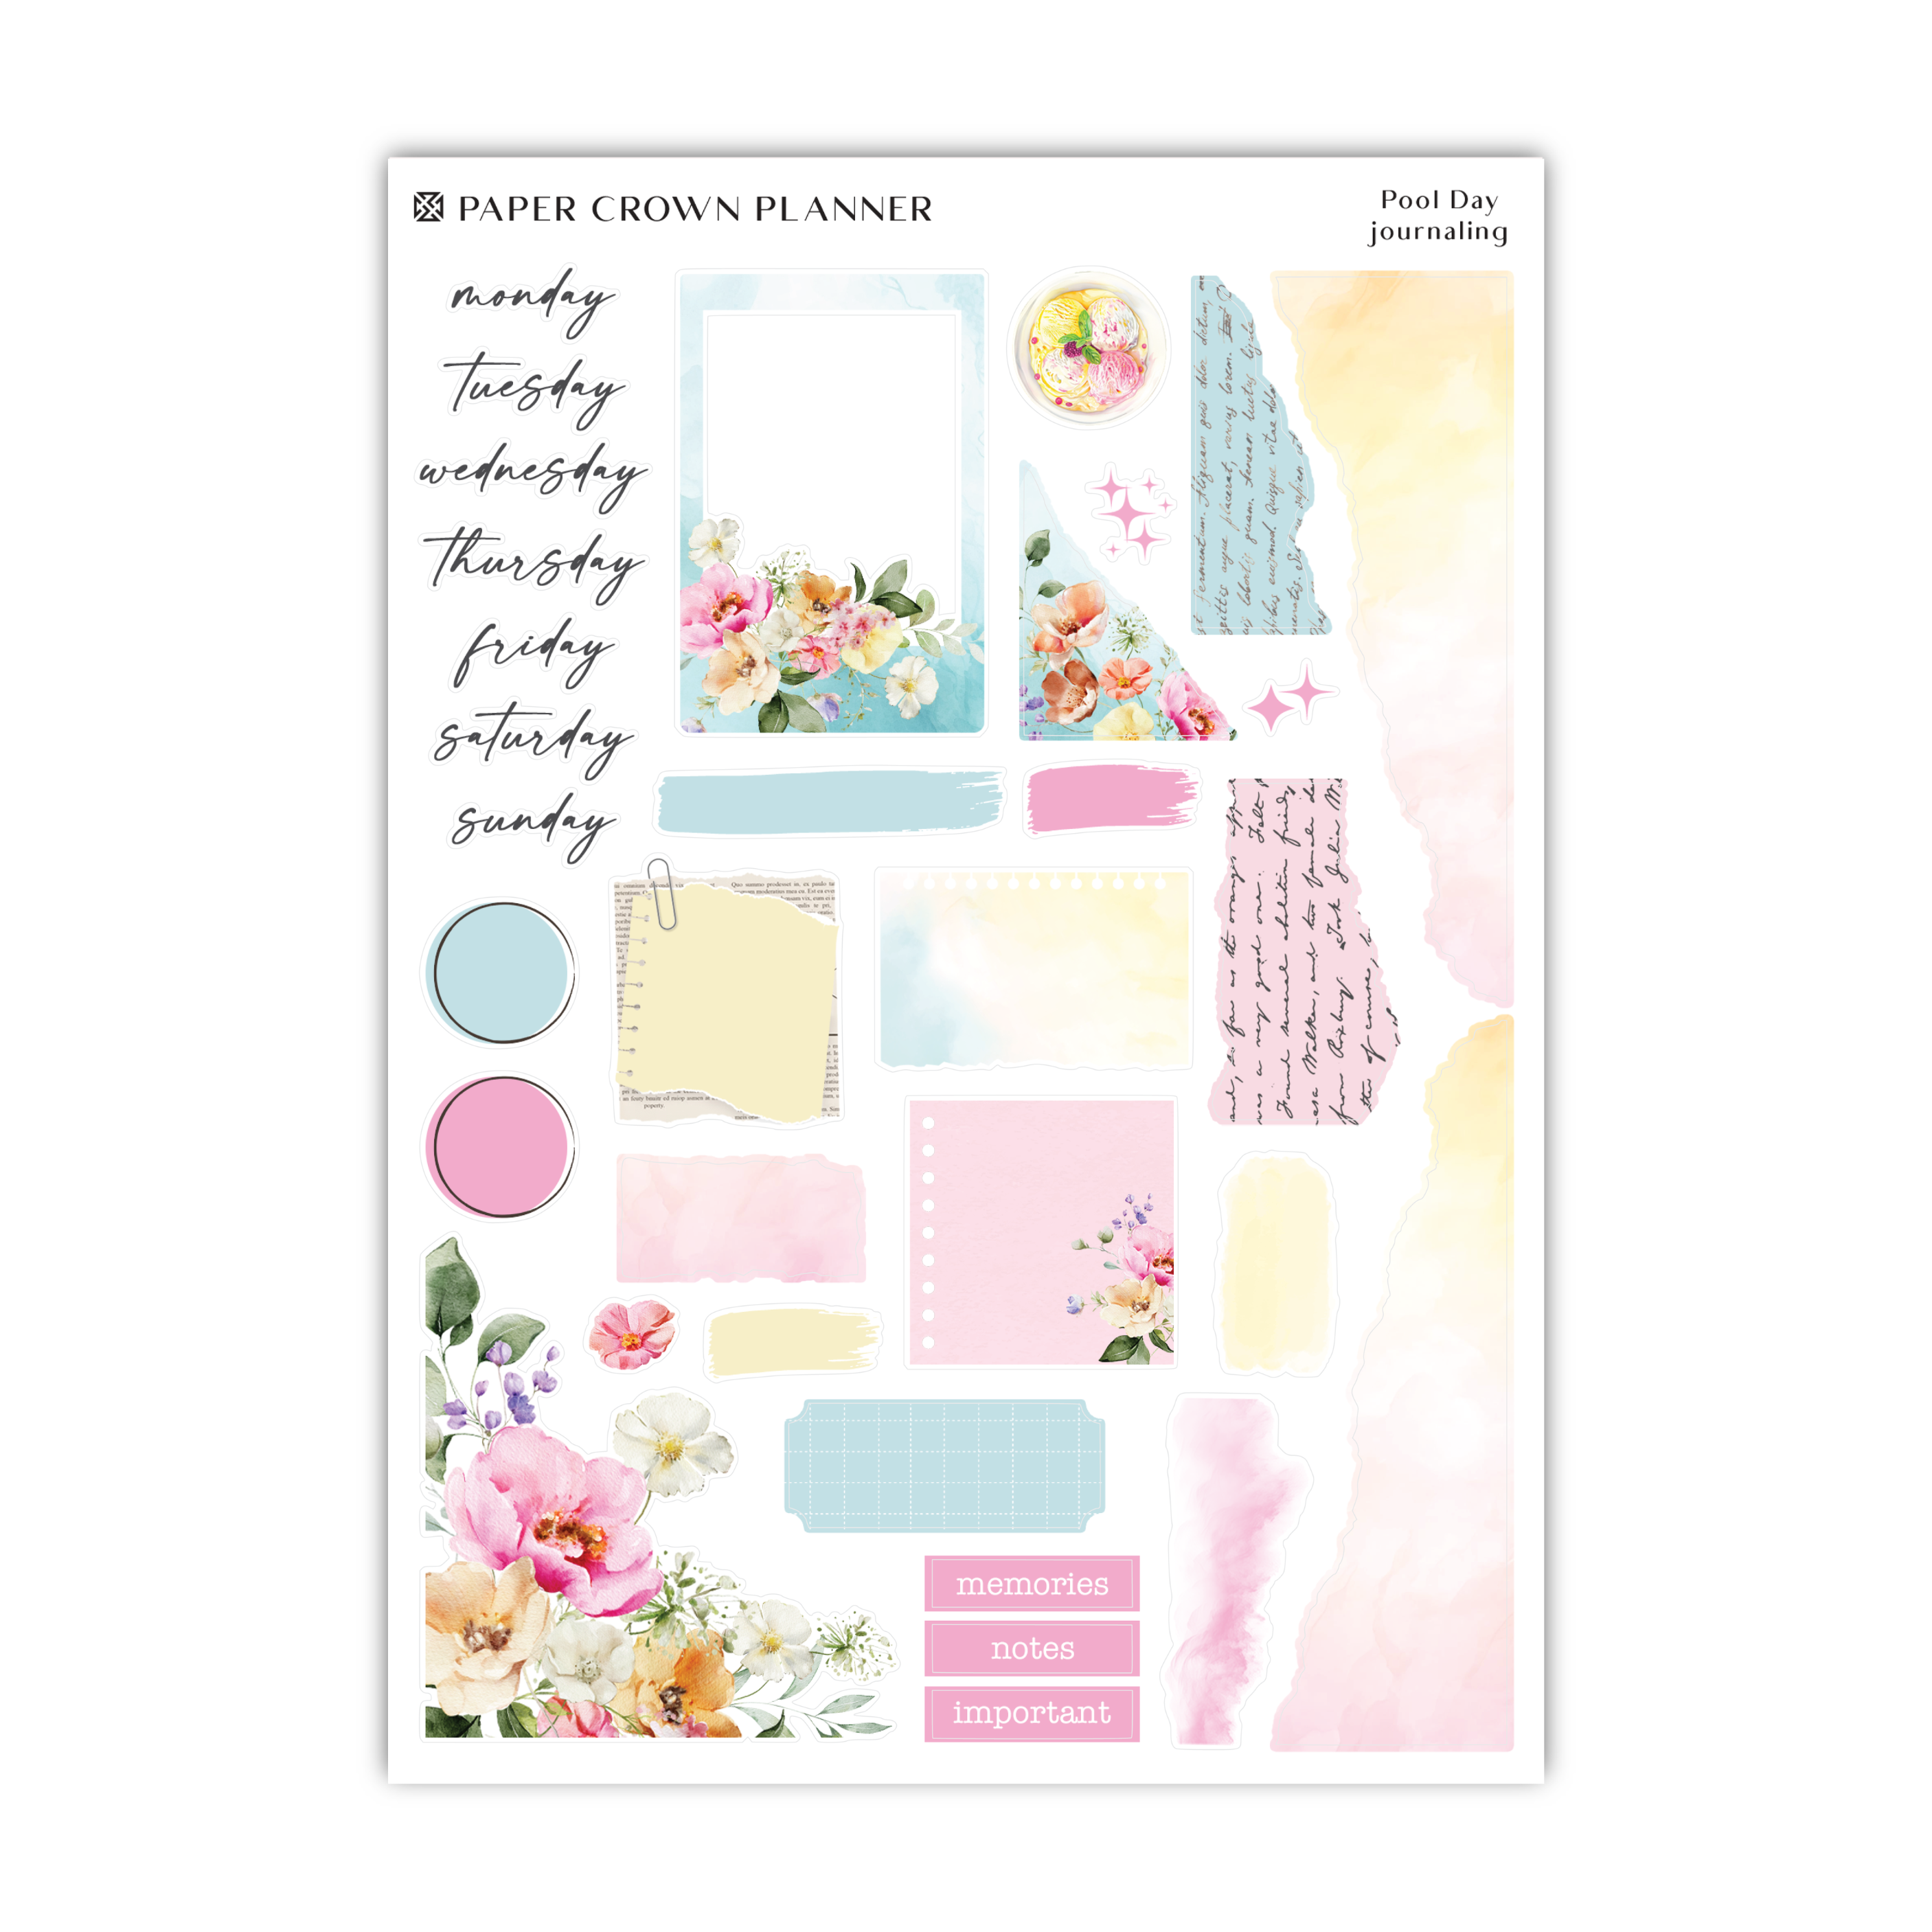 a paper crown planner sticker with flowers and pastel colors